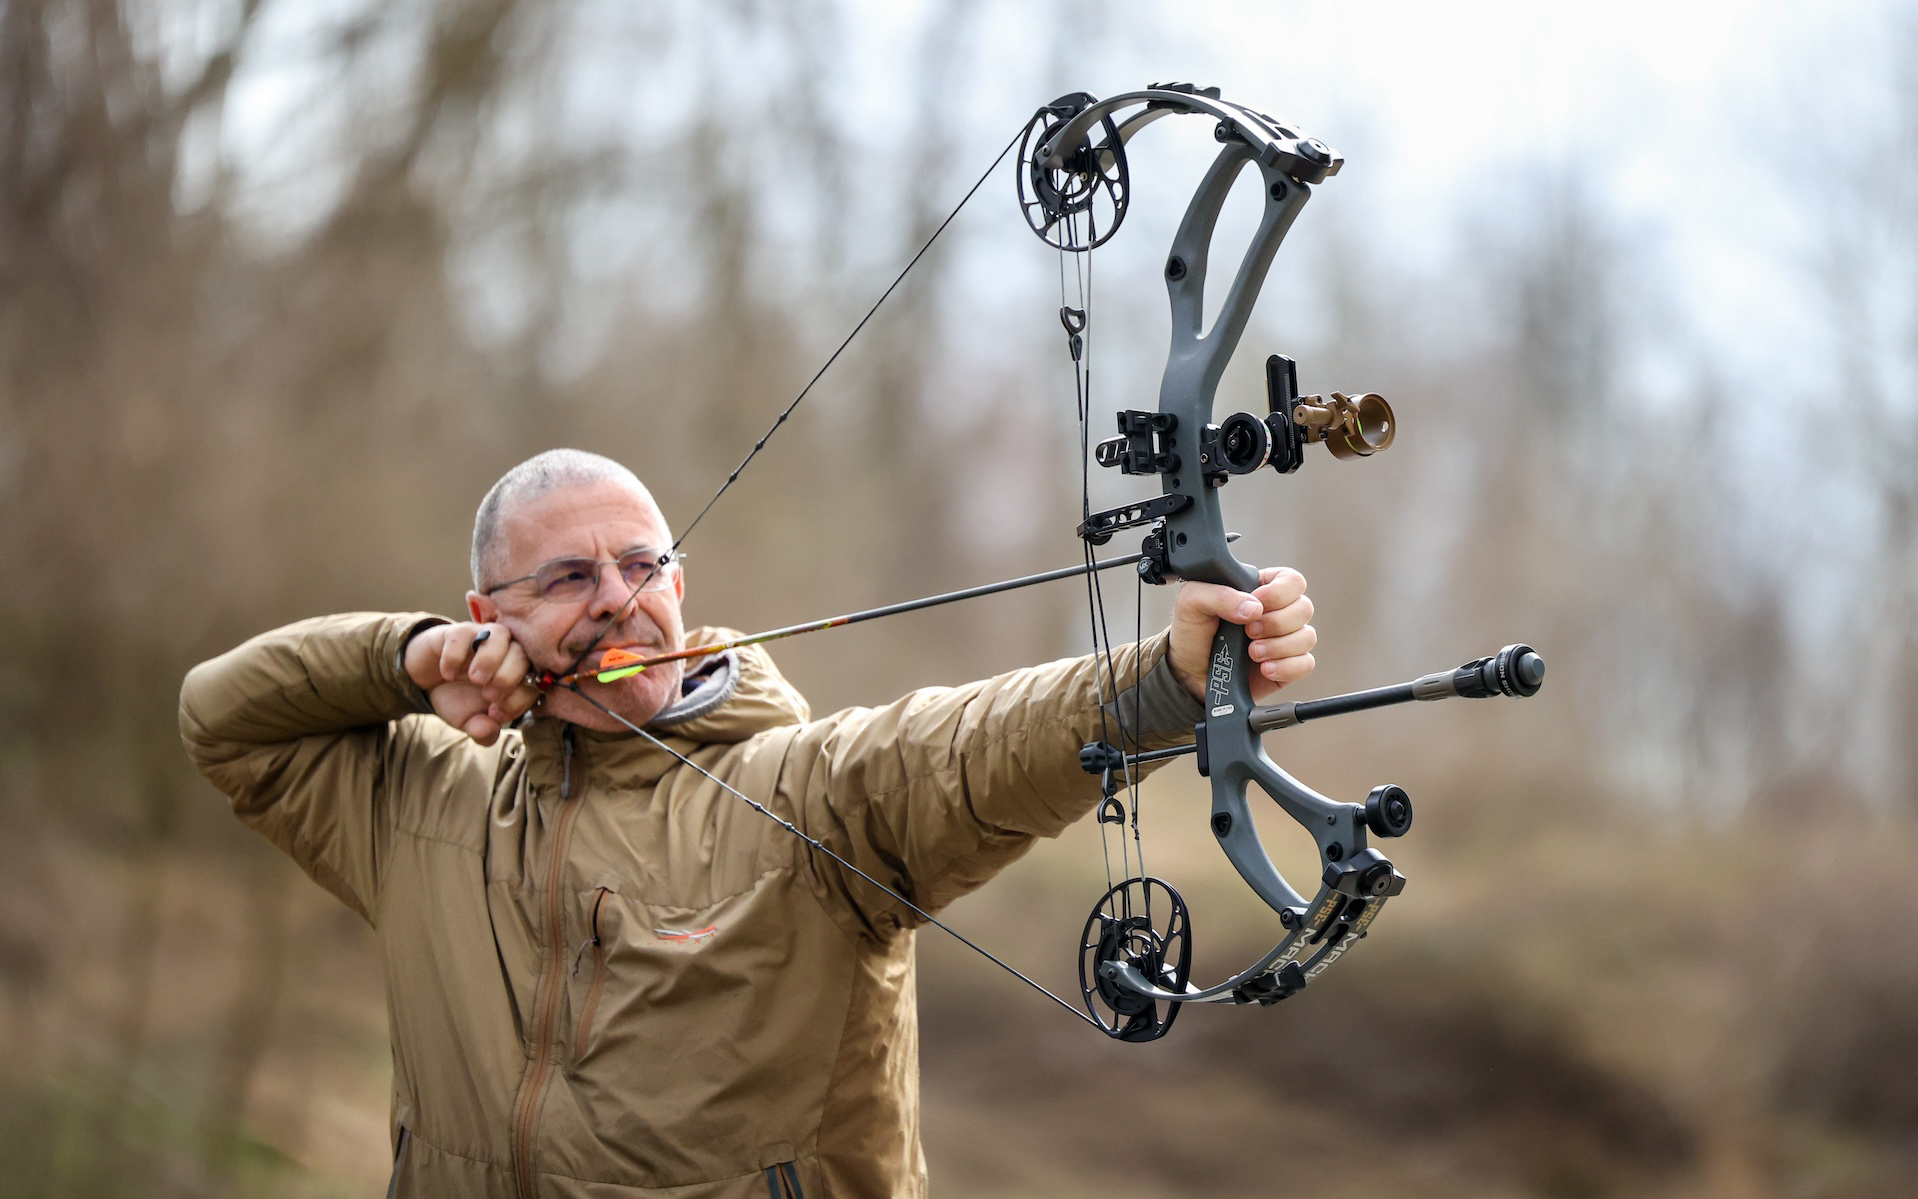 Compound Bow fishing Bow Kit with Arrow Ready to Shoot R/L Hand 20